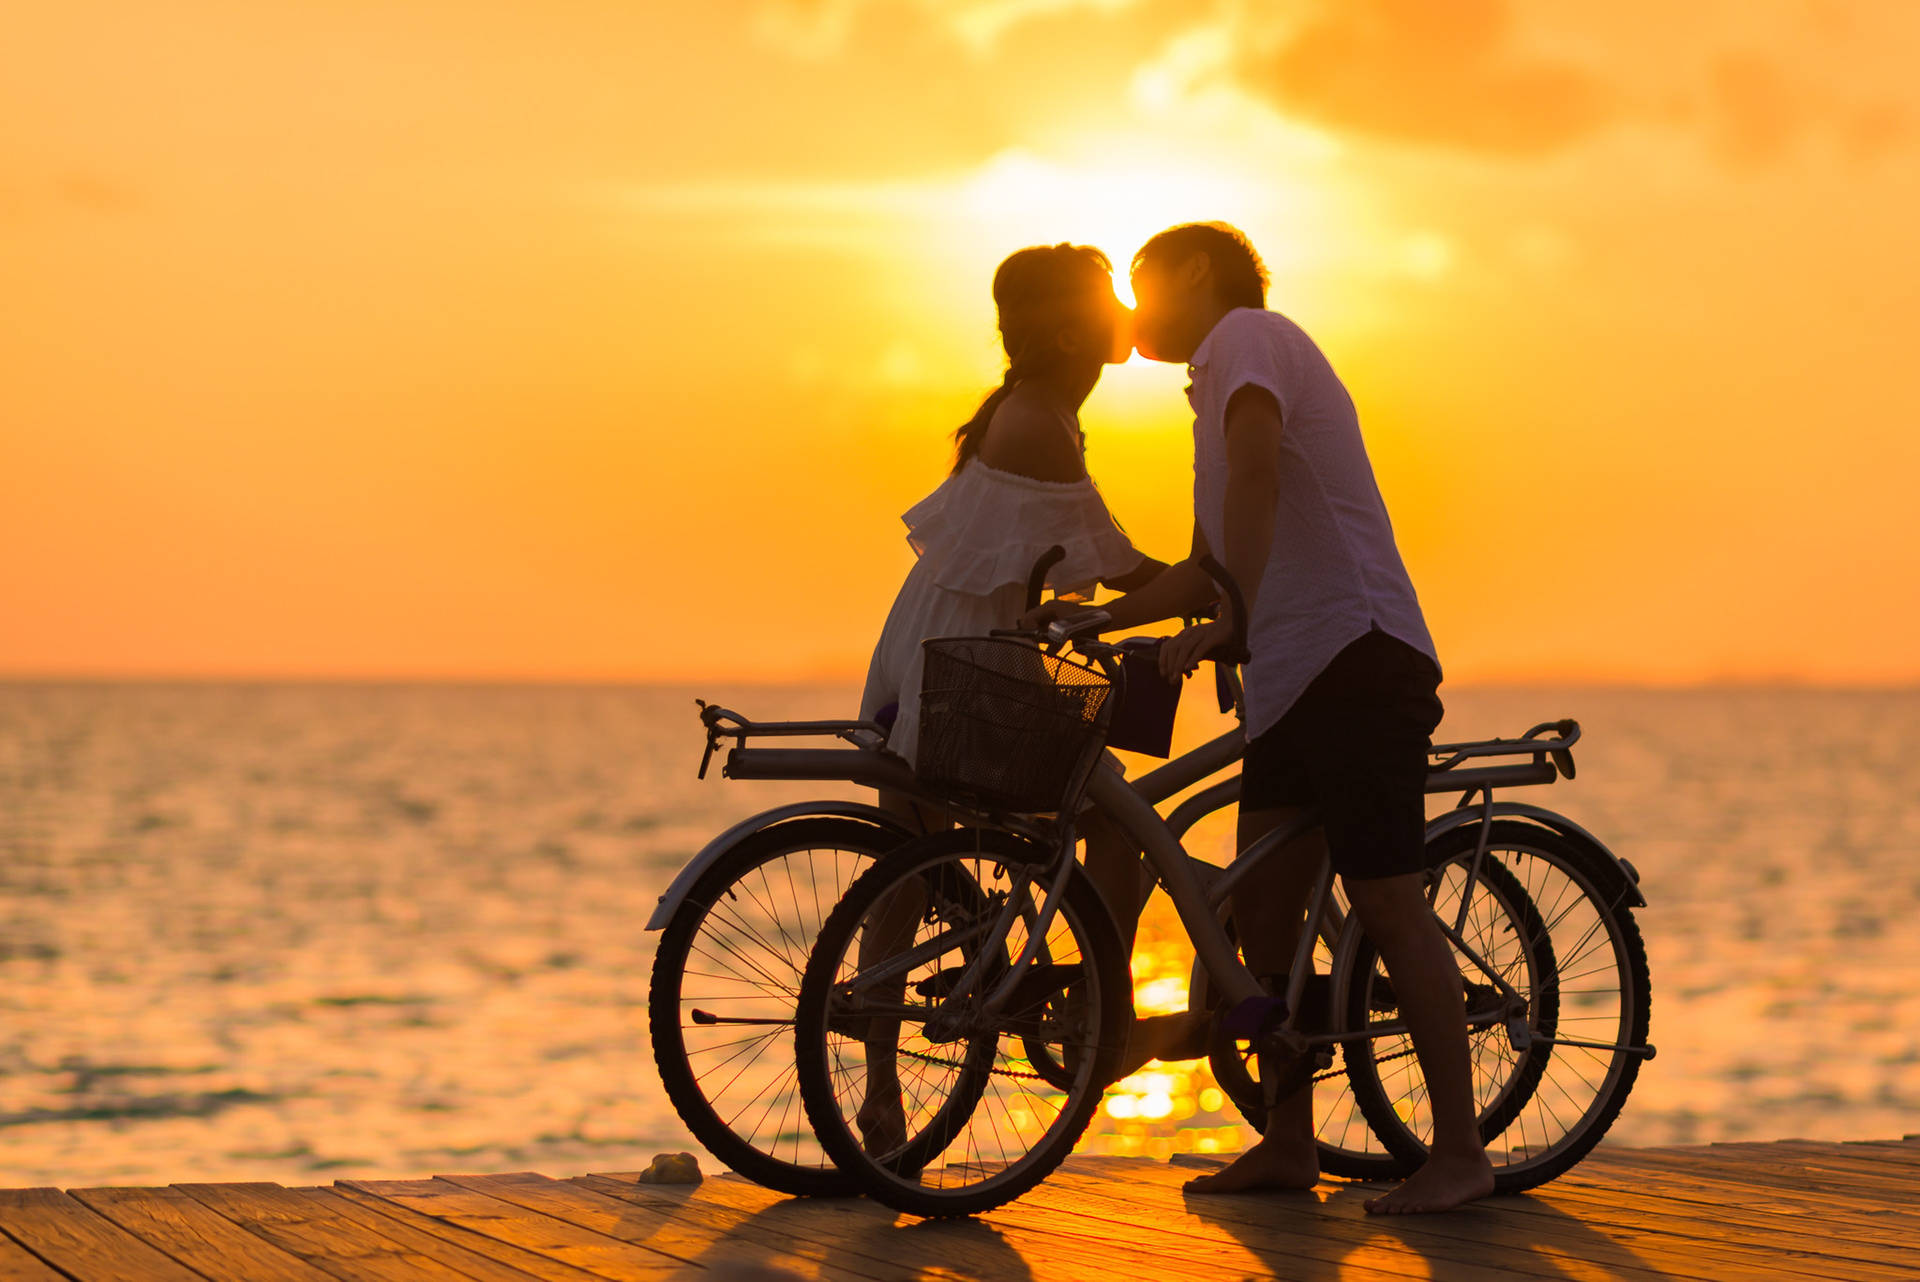 Romantic Love Bicycles Under Sunset Background